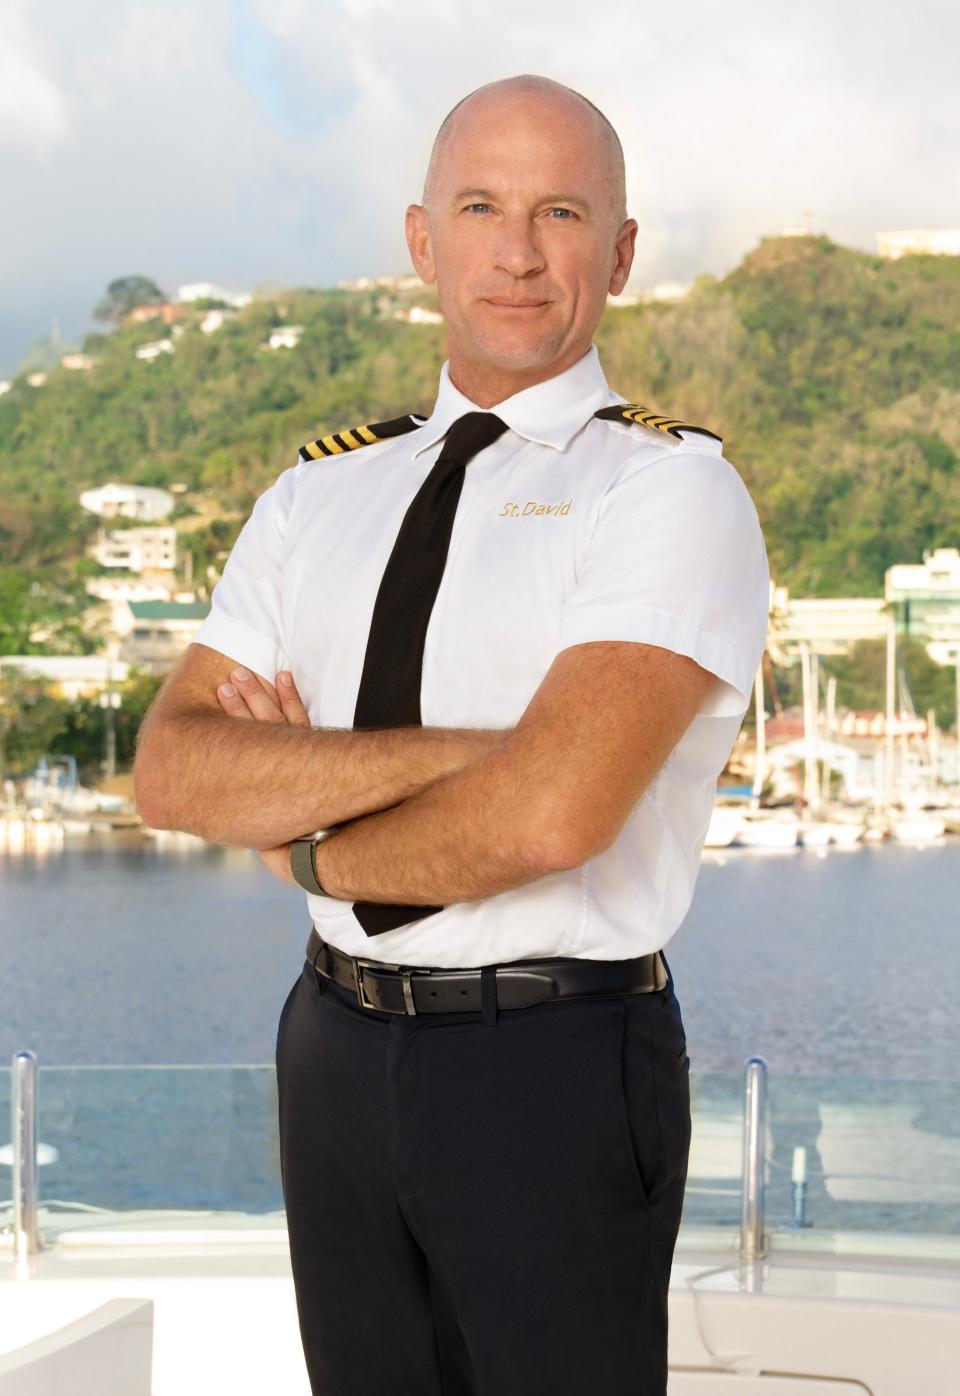 Kerry Titheradge, 48, of Palm Beach Gardens, Florida, is the captain of a super yacht on the latest season of the 'Below Deck' reality television series.